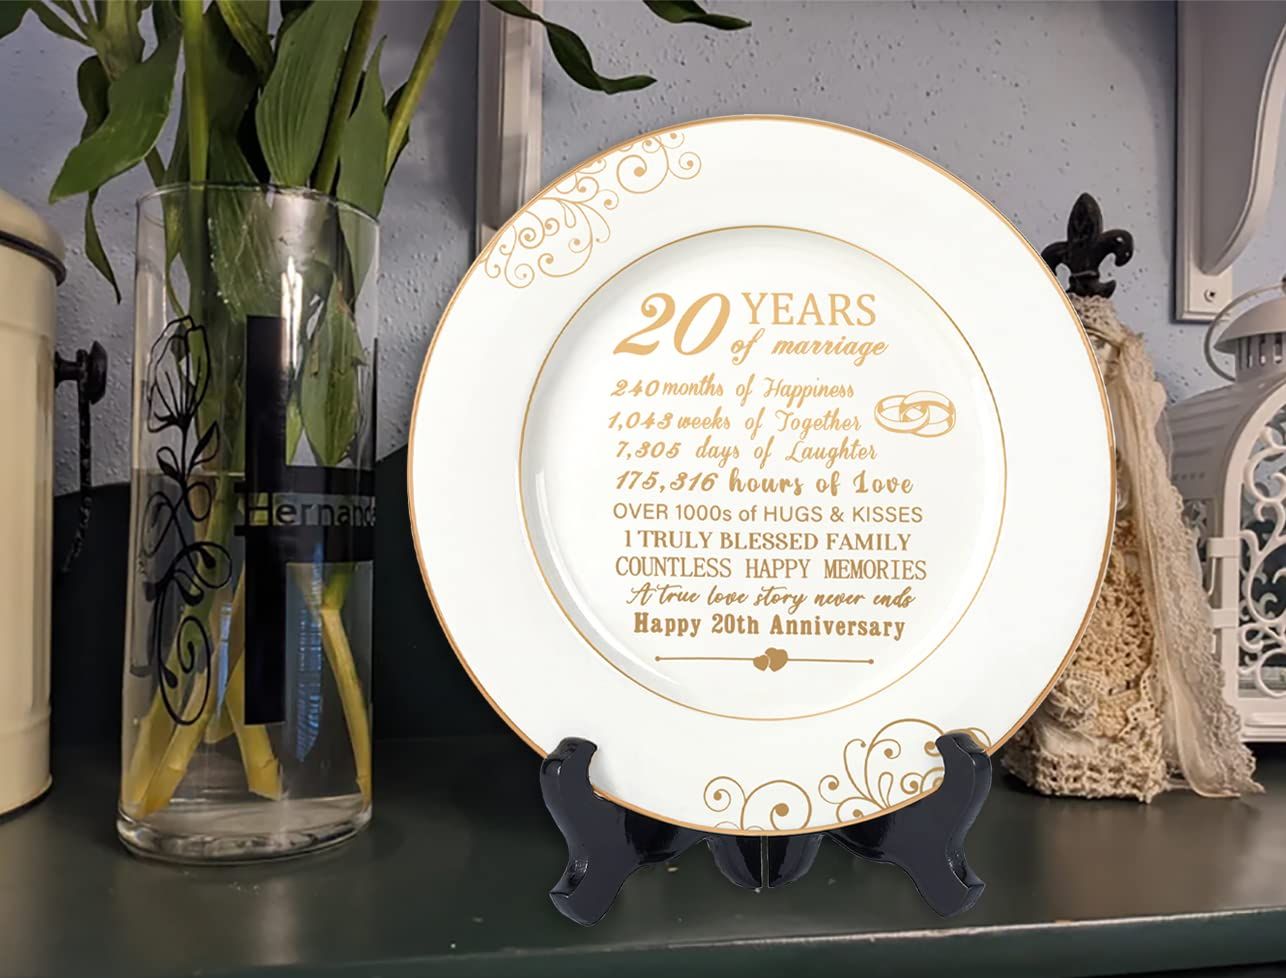 Amazon.com: 20th Anniversary Gift for Parents | 20th Anniversary Gift for  Mom and Dad | 20 Year Anniversary Gift for Husband | Milestone Anniversary  Gift : Handmade Products